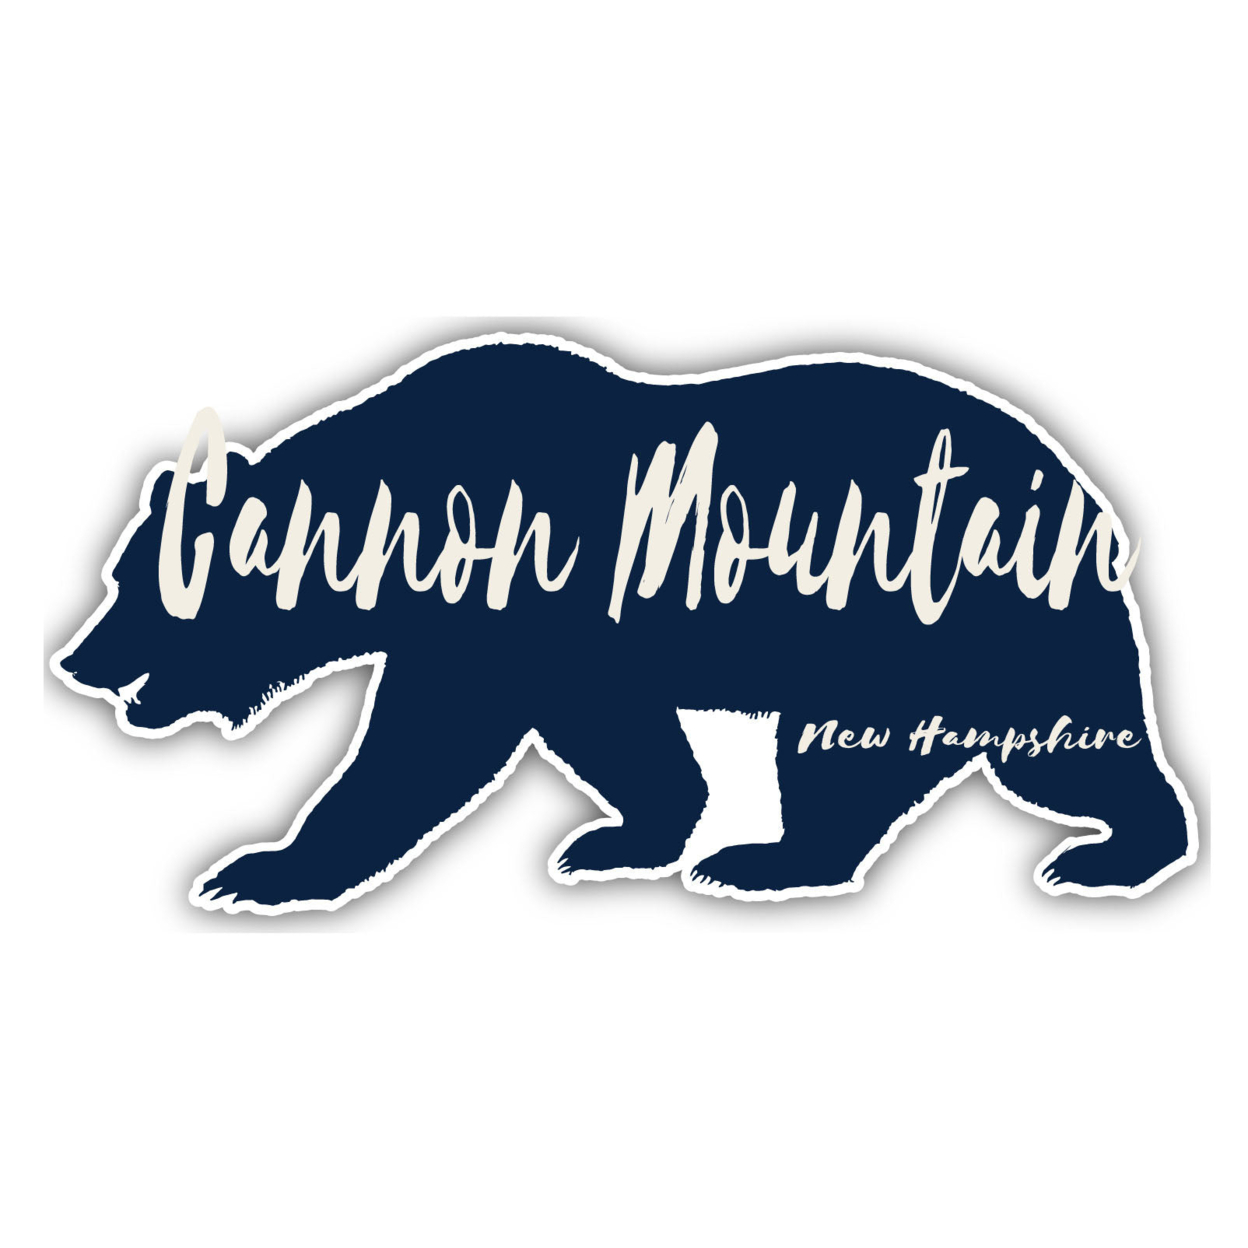 Cannon Mountain New Hampshire Souvenir Decorative Stickers (Choose Theme And Size) - 4-Pack, 12-Inch, Bear